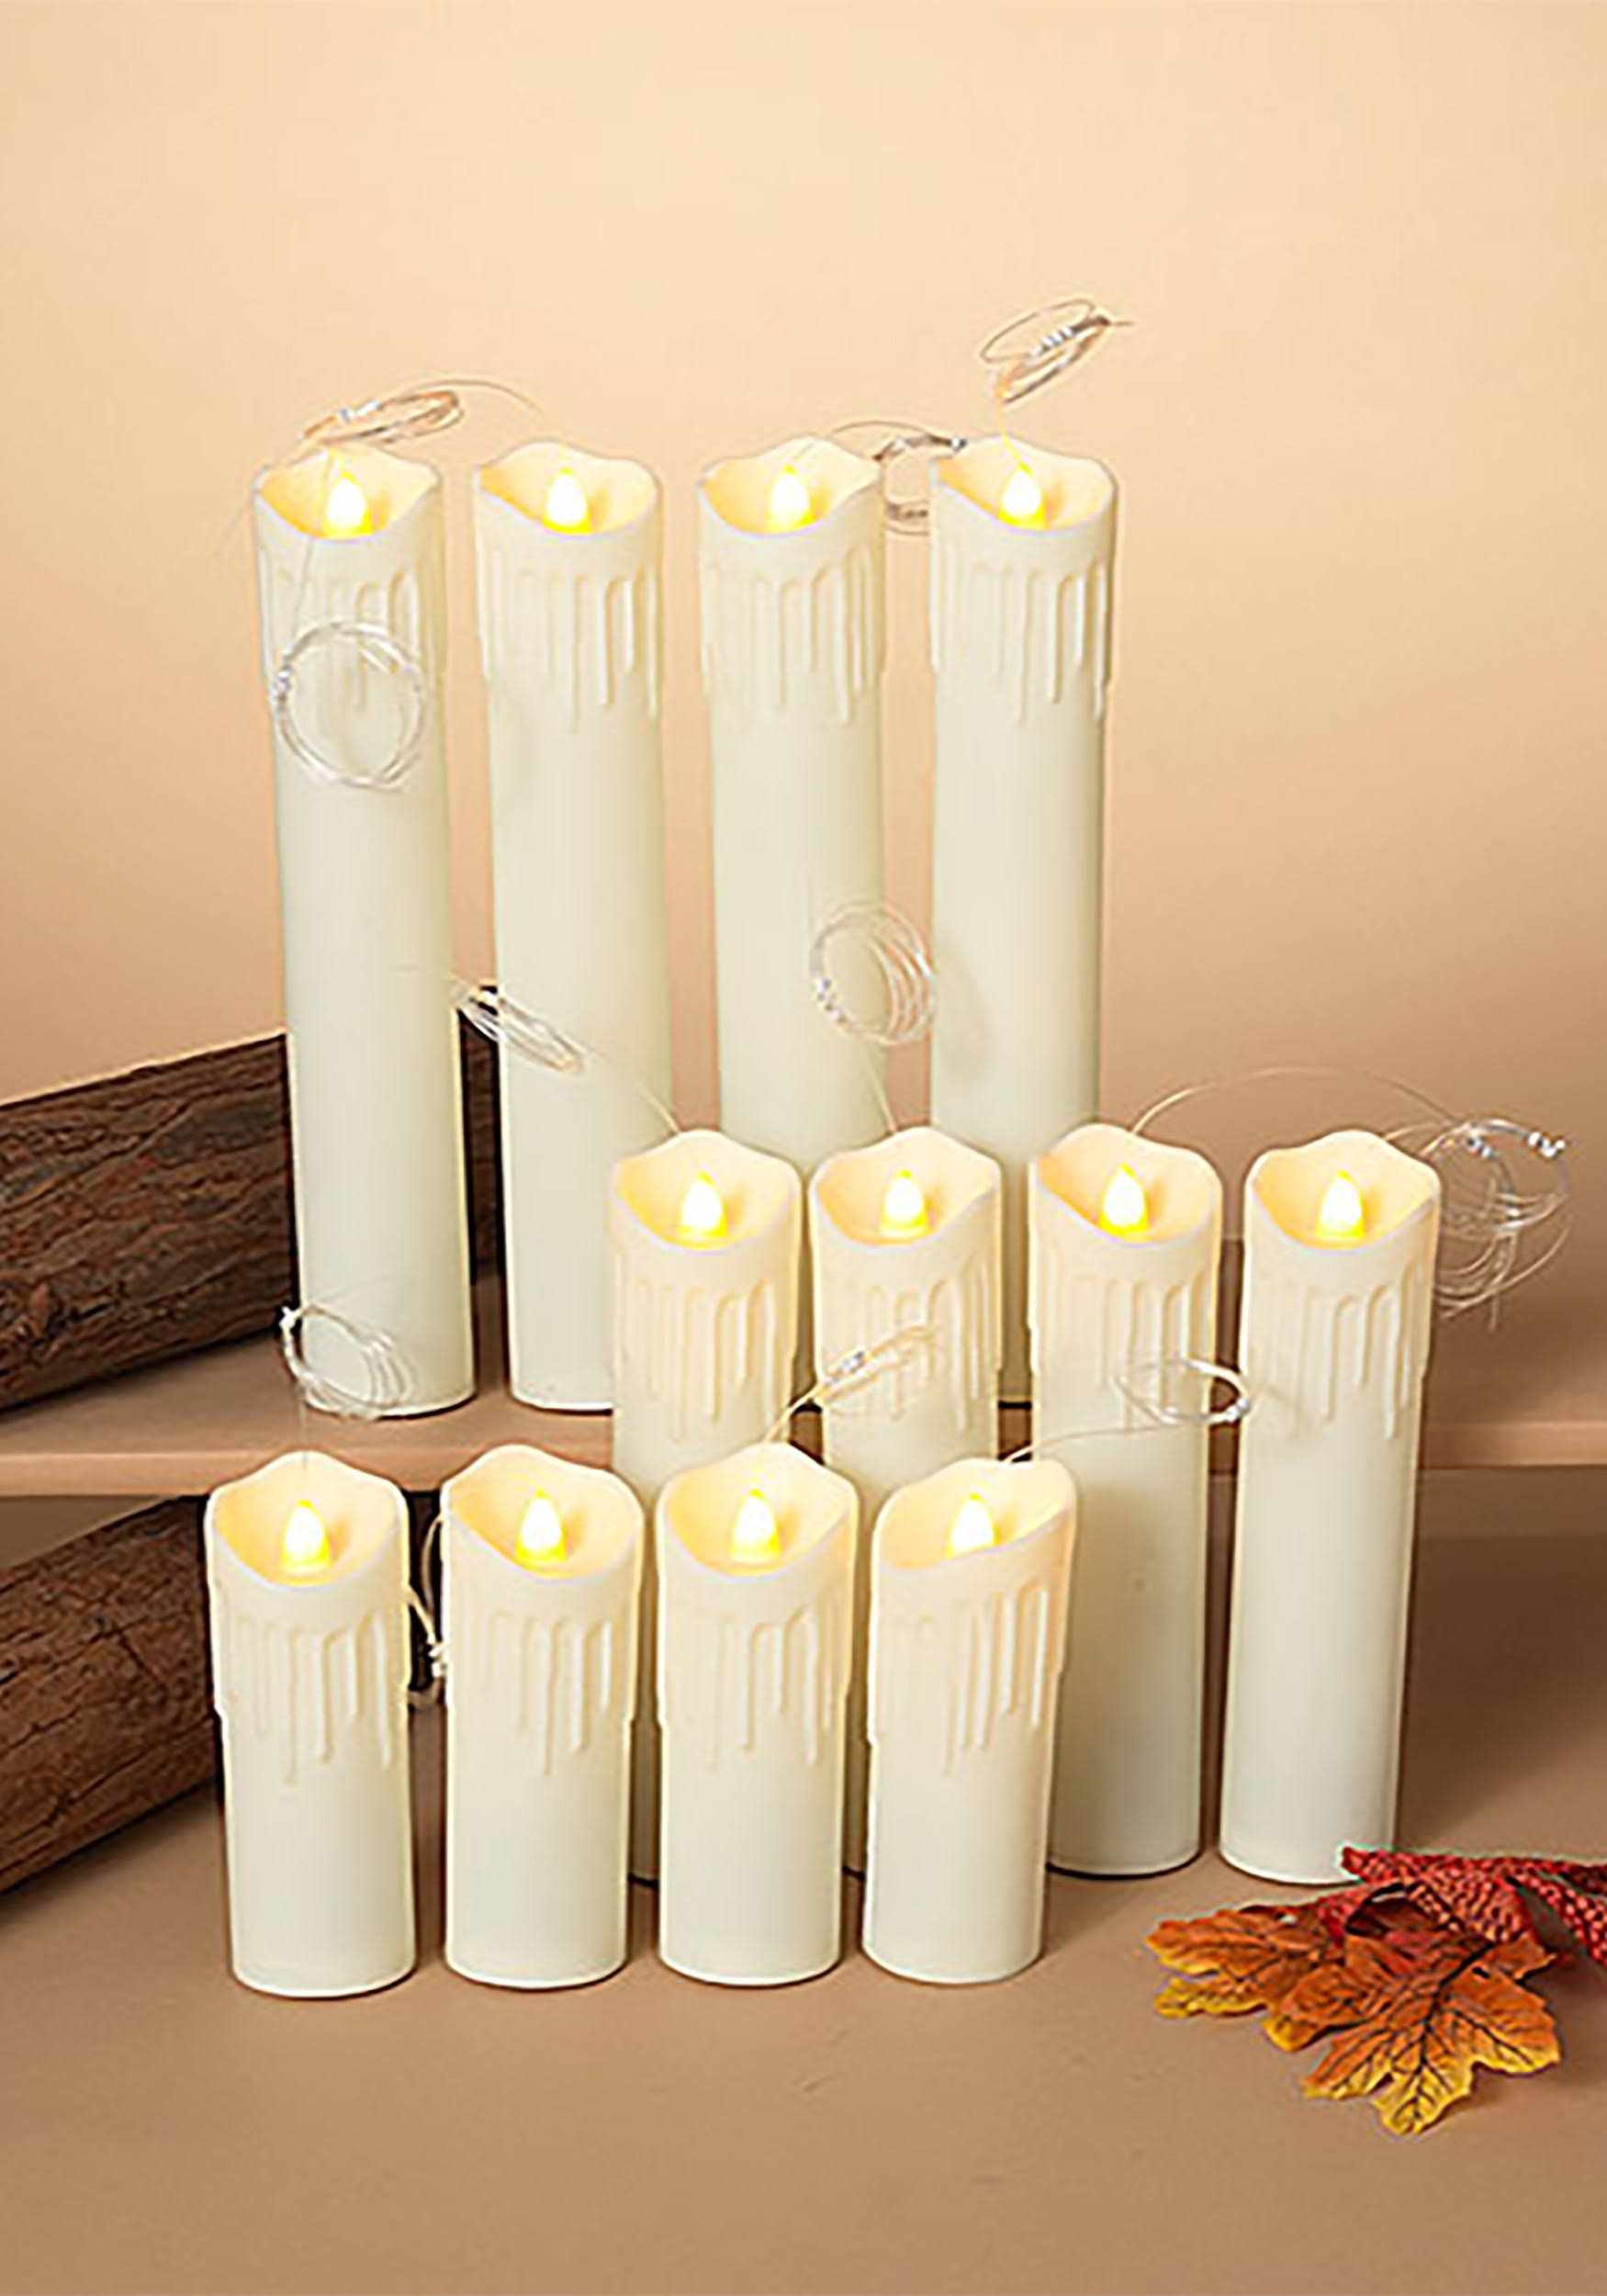 Set of 12 Lighted Hanging Candles with Timer & Remote Control 2541690